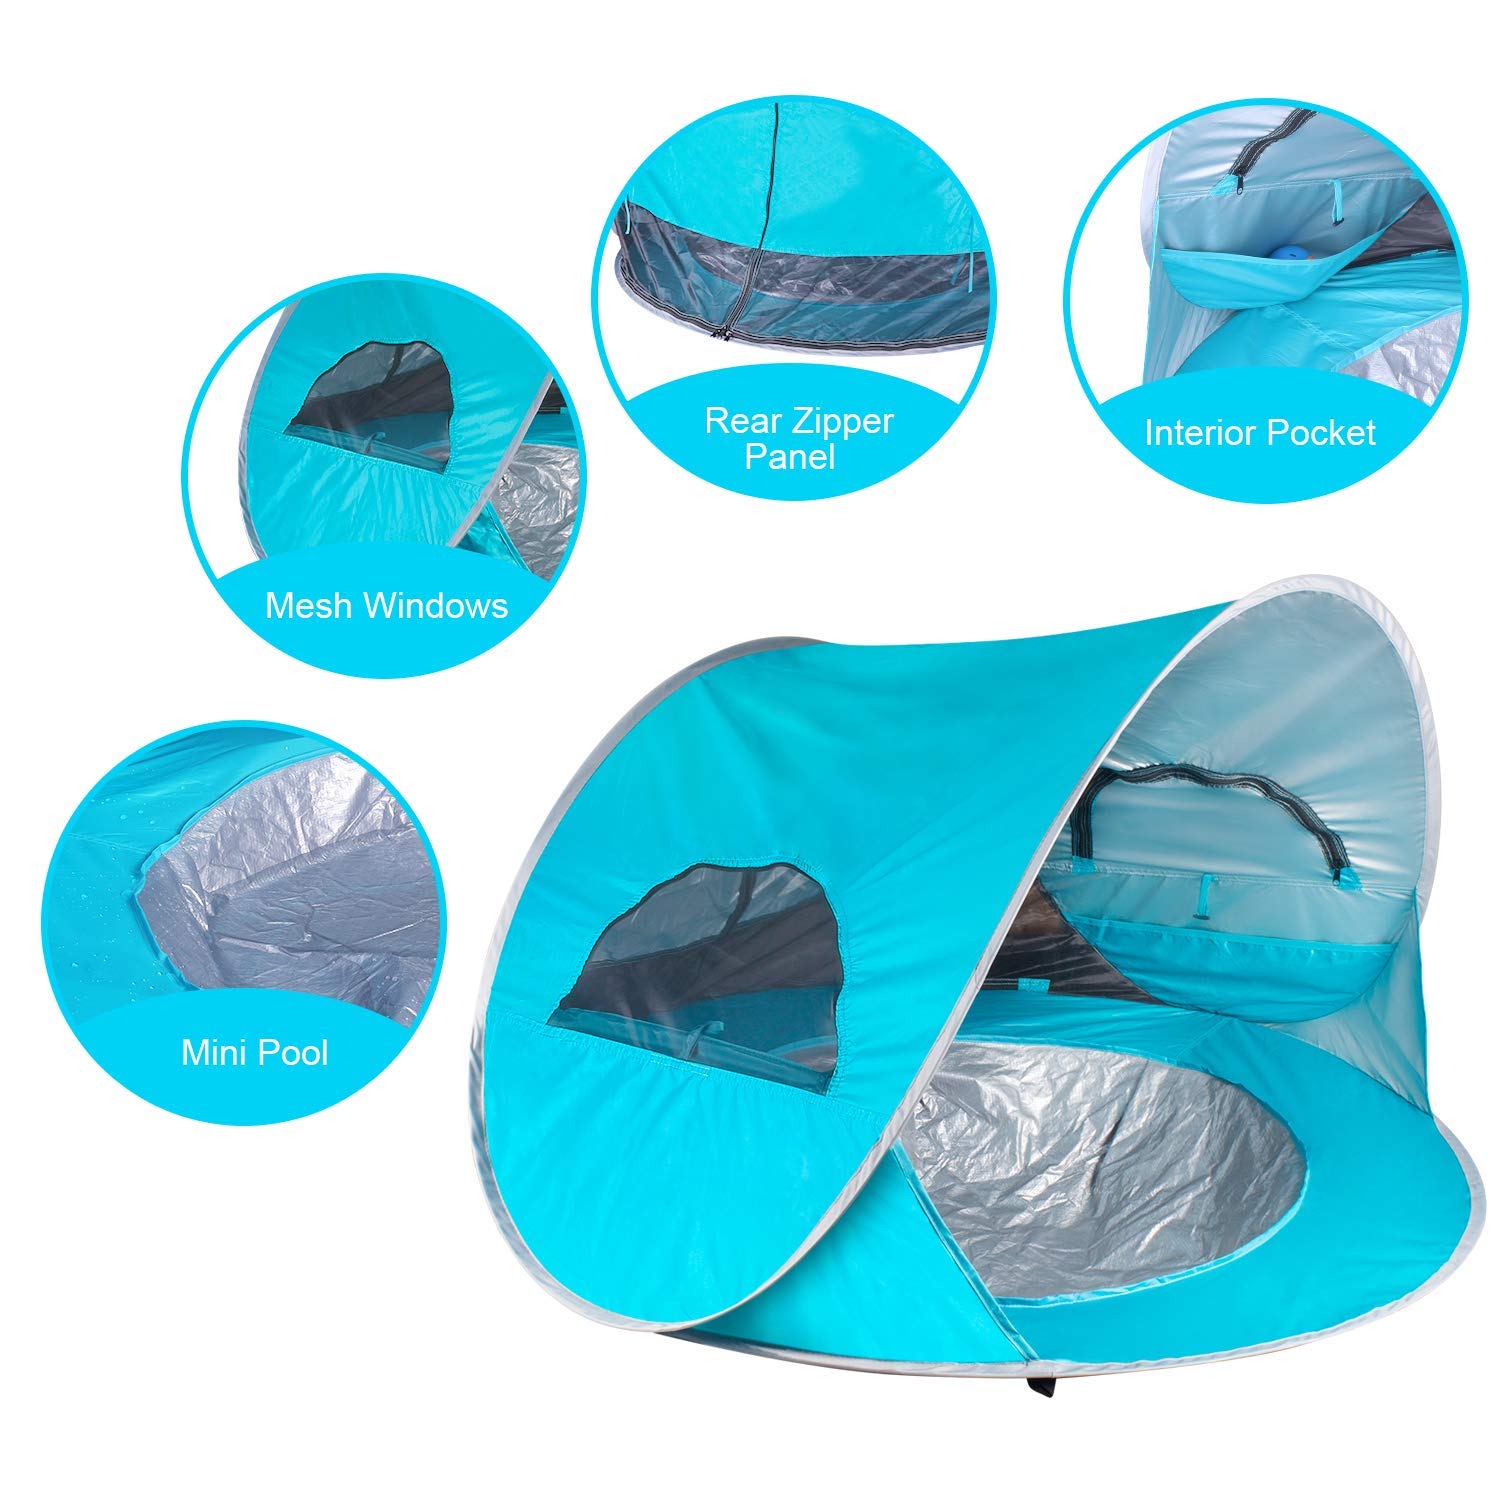 AIOIAI Baby Beach Tent with Built-in Pool, Infant Pop Up Tent with 2 Mesh Side Windows, 2 Side Pockets, UPF 50+ Sun Shade Shelter with Rear Zipper Panel for Aged 0-3, Fits 1-2 Children 